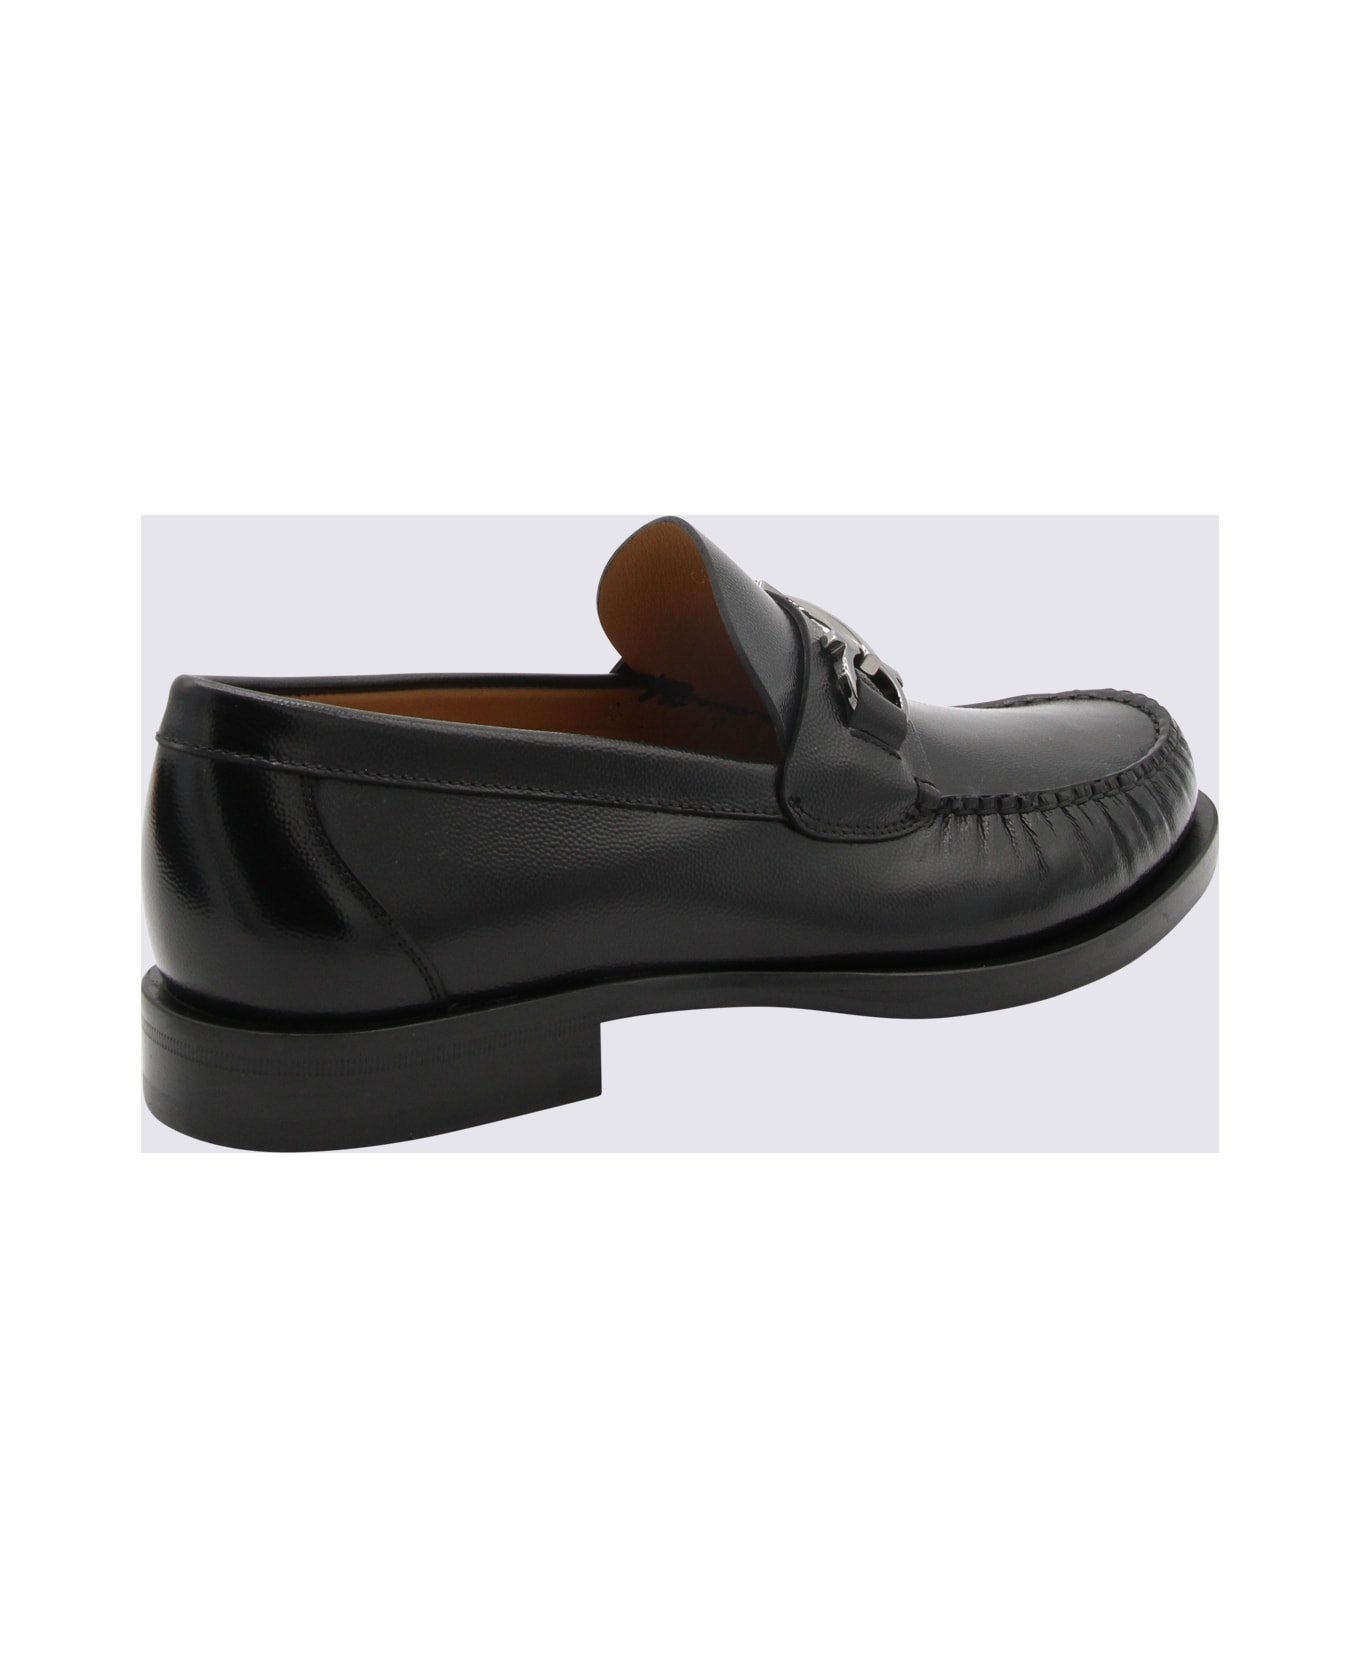 Ferragamo Black And New Biscuit Leather Loafers - NERO/NEW BISCOTTO